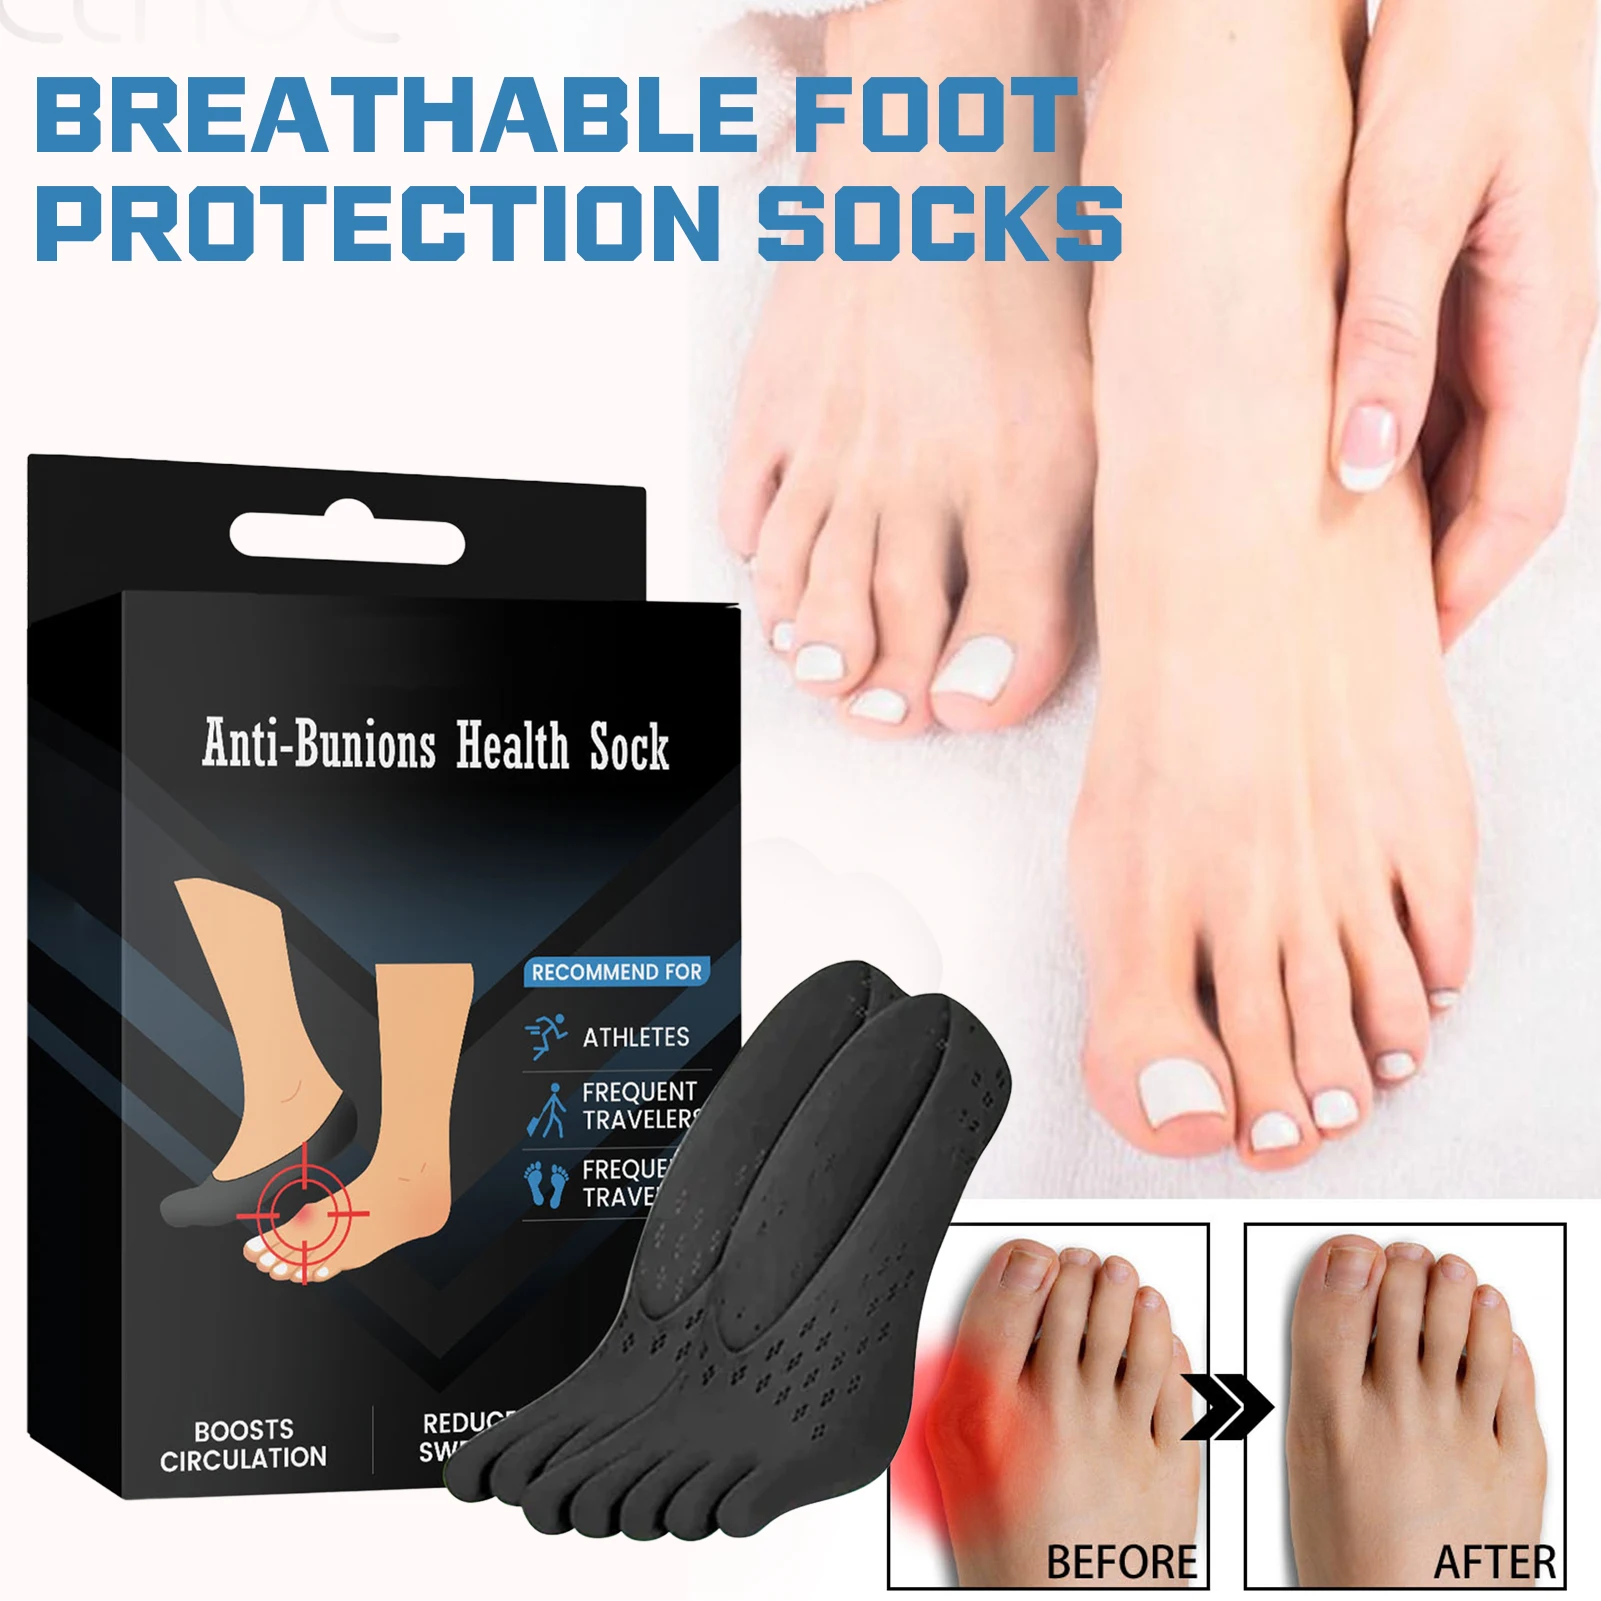 Anti-Bunions Health Sock Pain Stiffness Relief For Outdoor Sports Foot Care Socks Heels Warm Breathable man Meias de Cuidado zjkc cold laser therapy machine 3w 650nm 808nm handheld soft laser treatment for inflammation and pain relief muscle stiffness